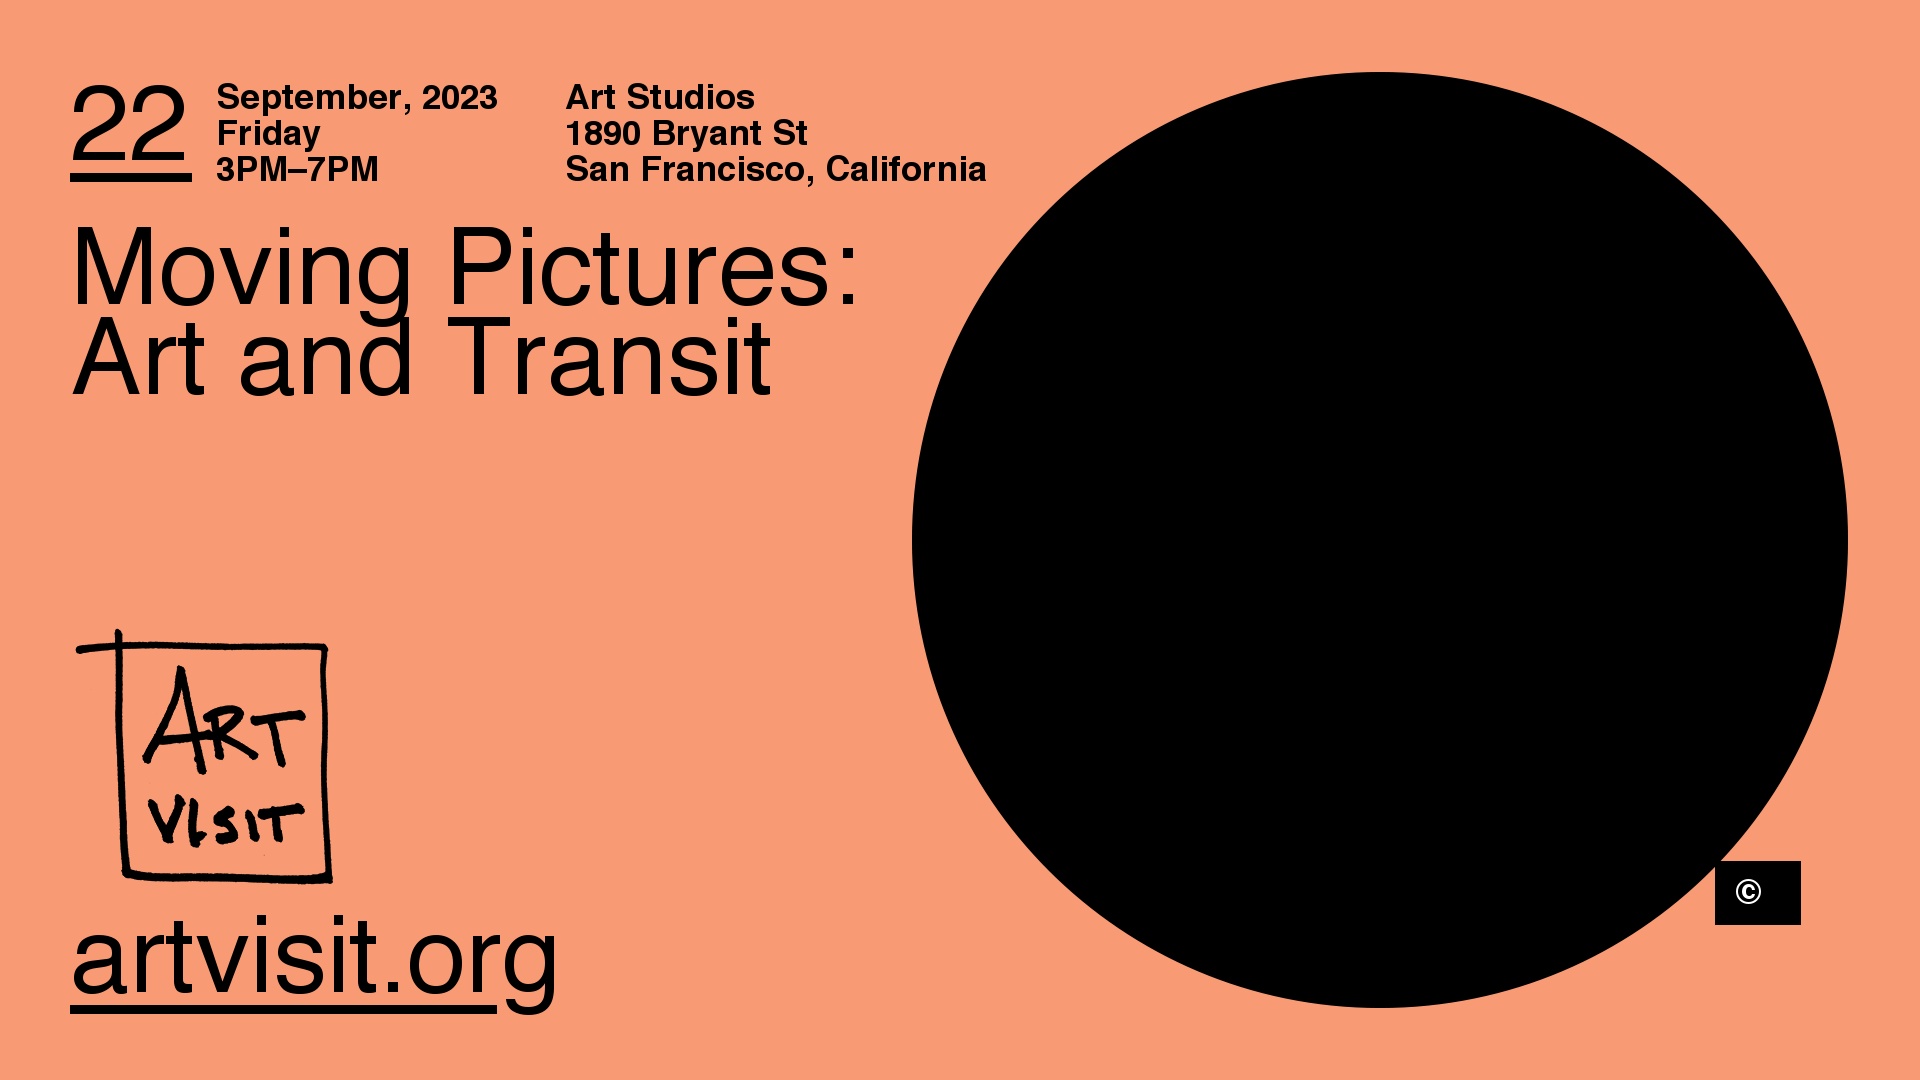 Moving Pictures: Art and Transit